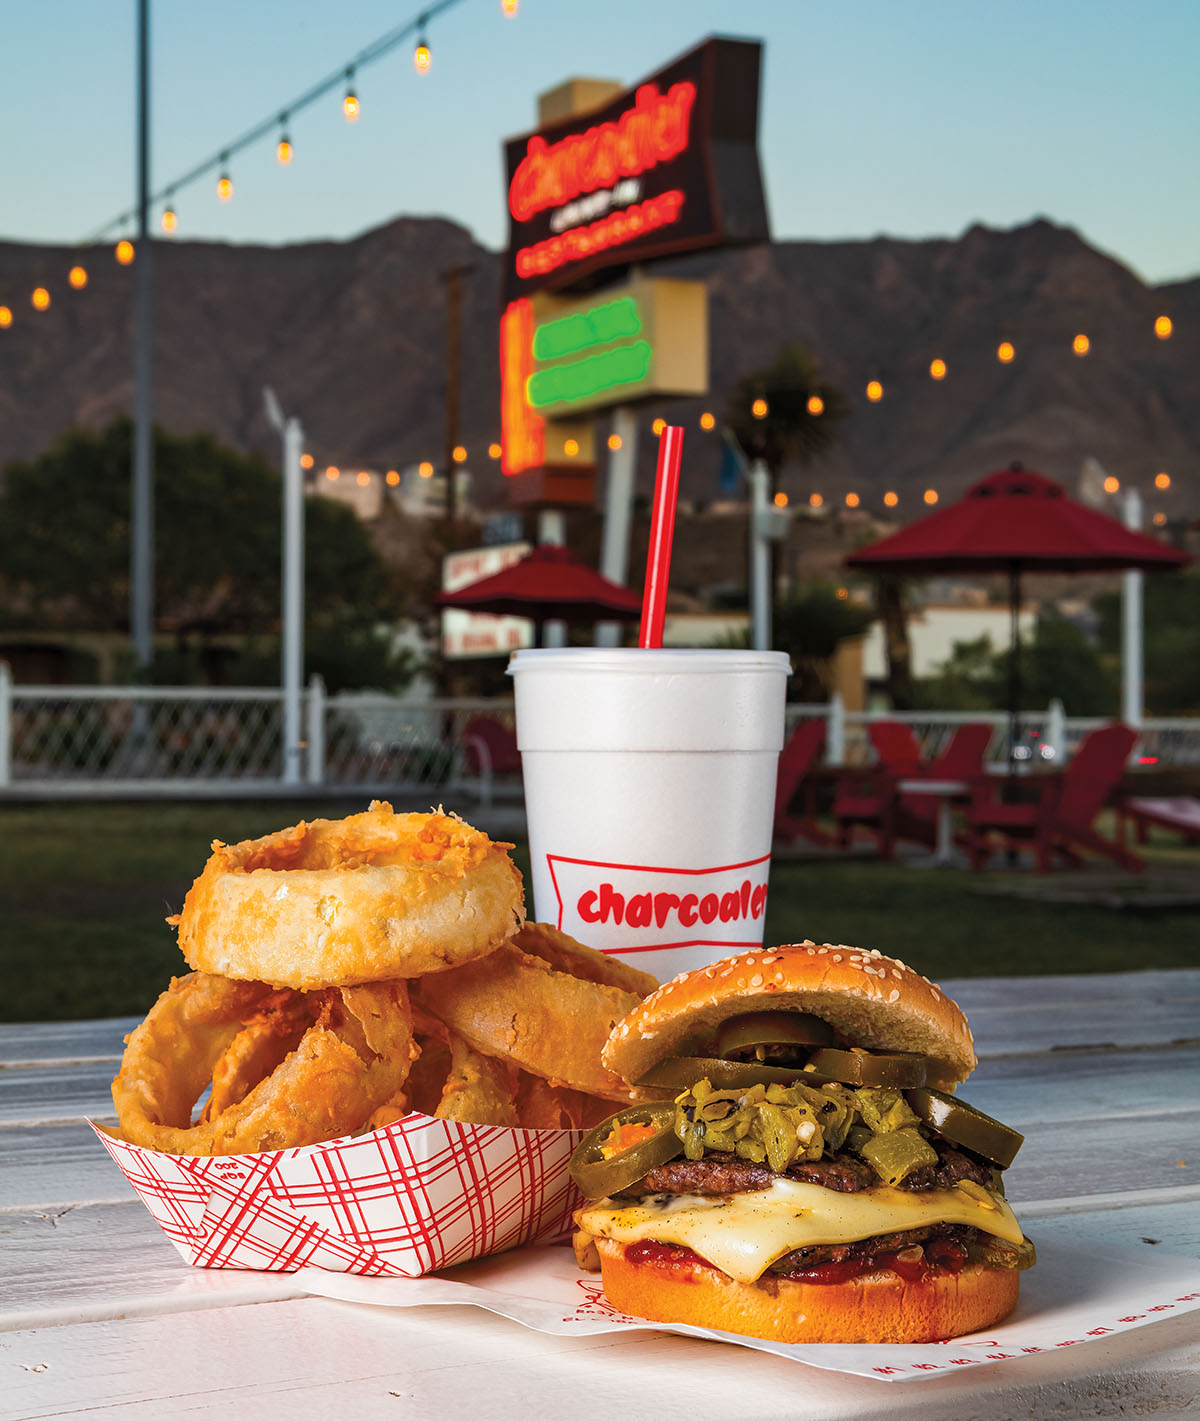 A serving of onion rings, a cheeseburger and drink in a styrofoam cup underneath the Charcoaler's sign